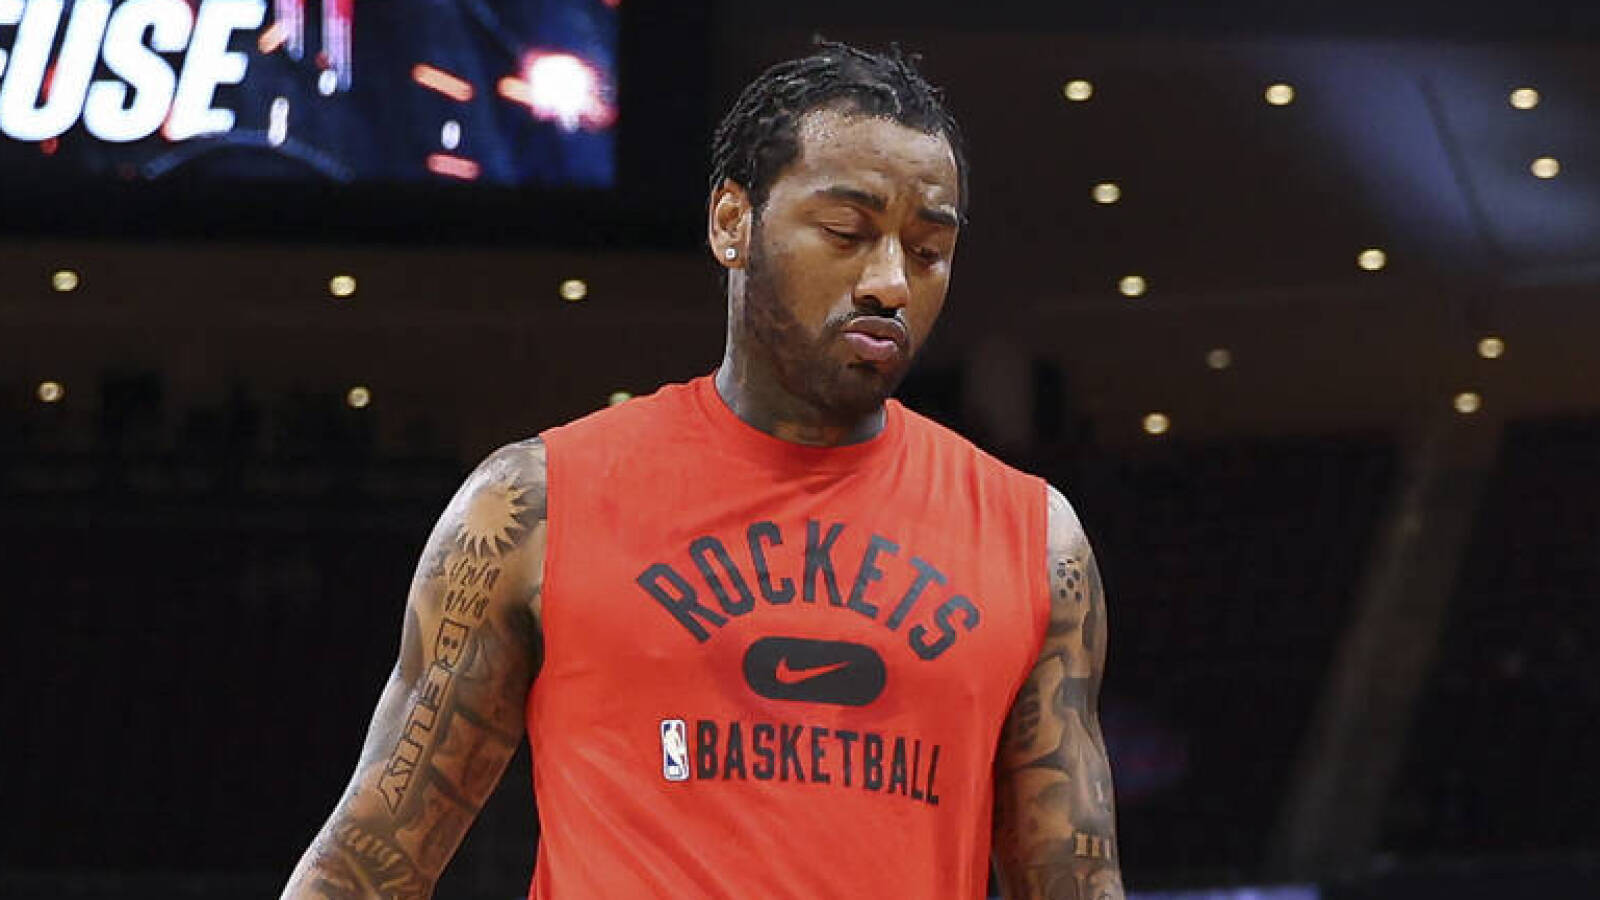 John Wall: 'At one point in time, I thought about committing suicide'